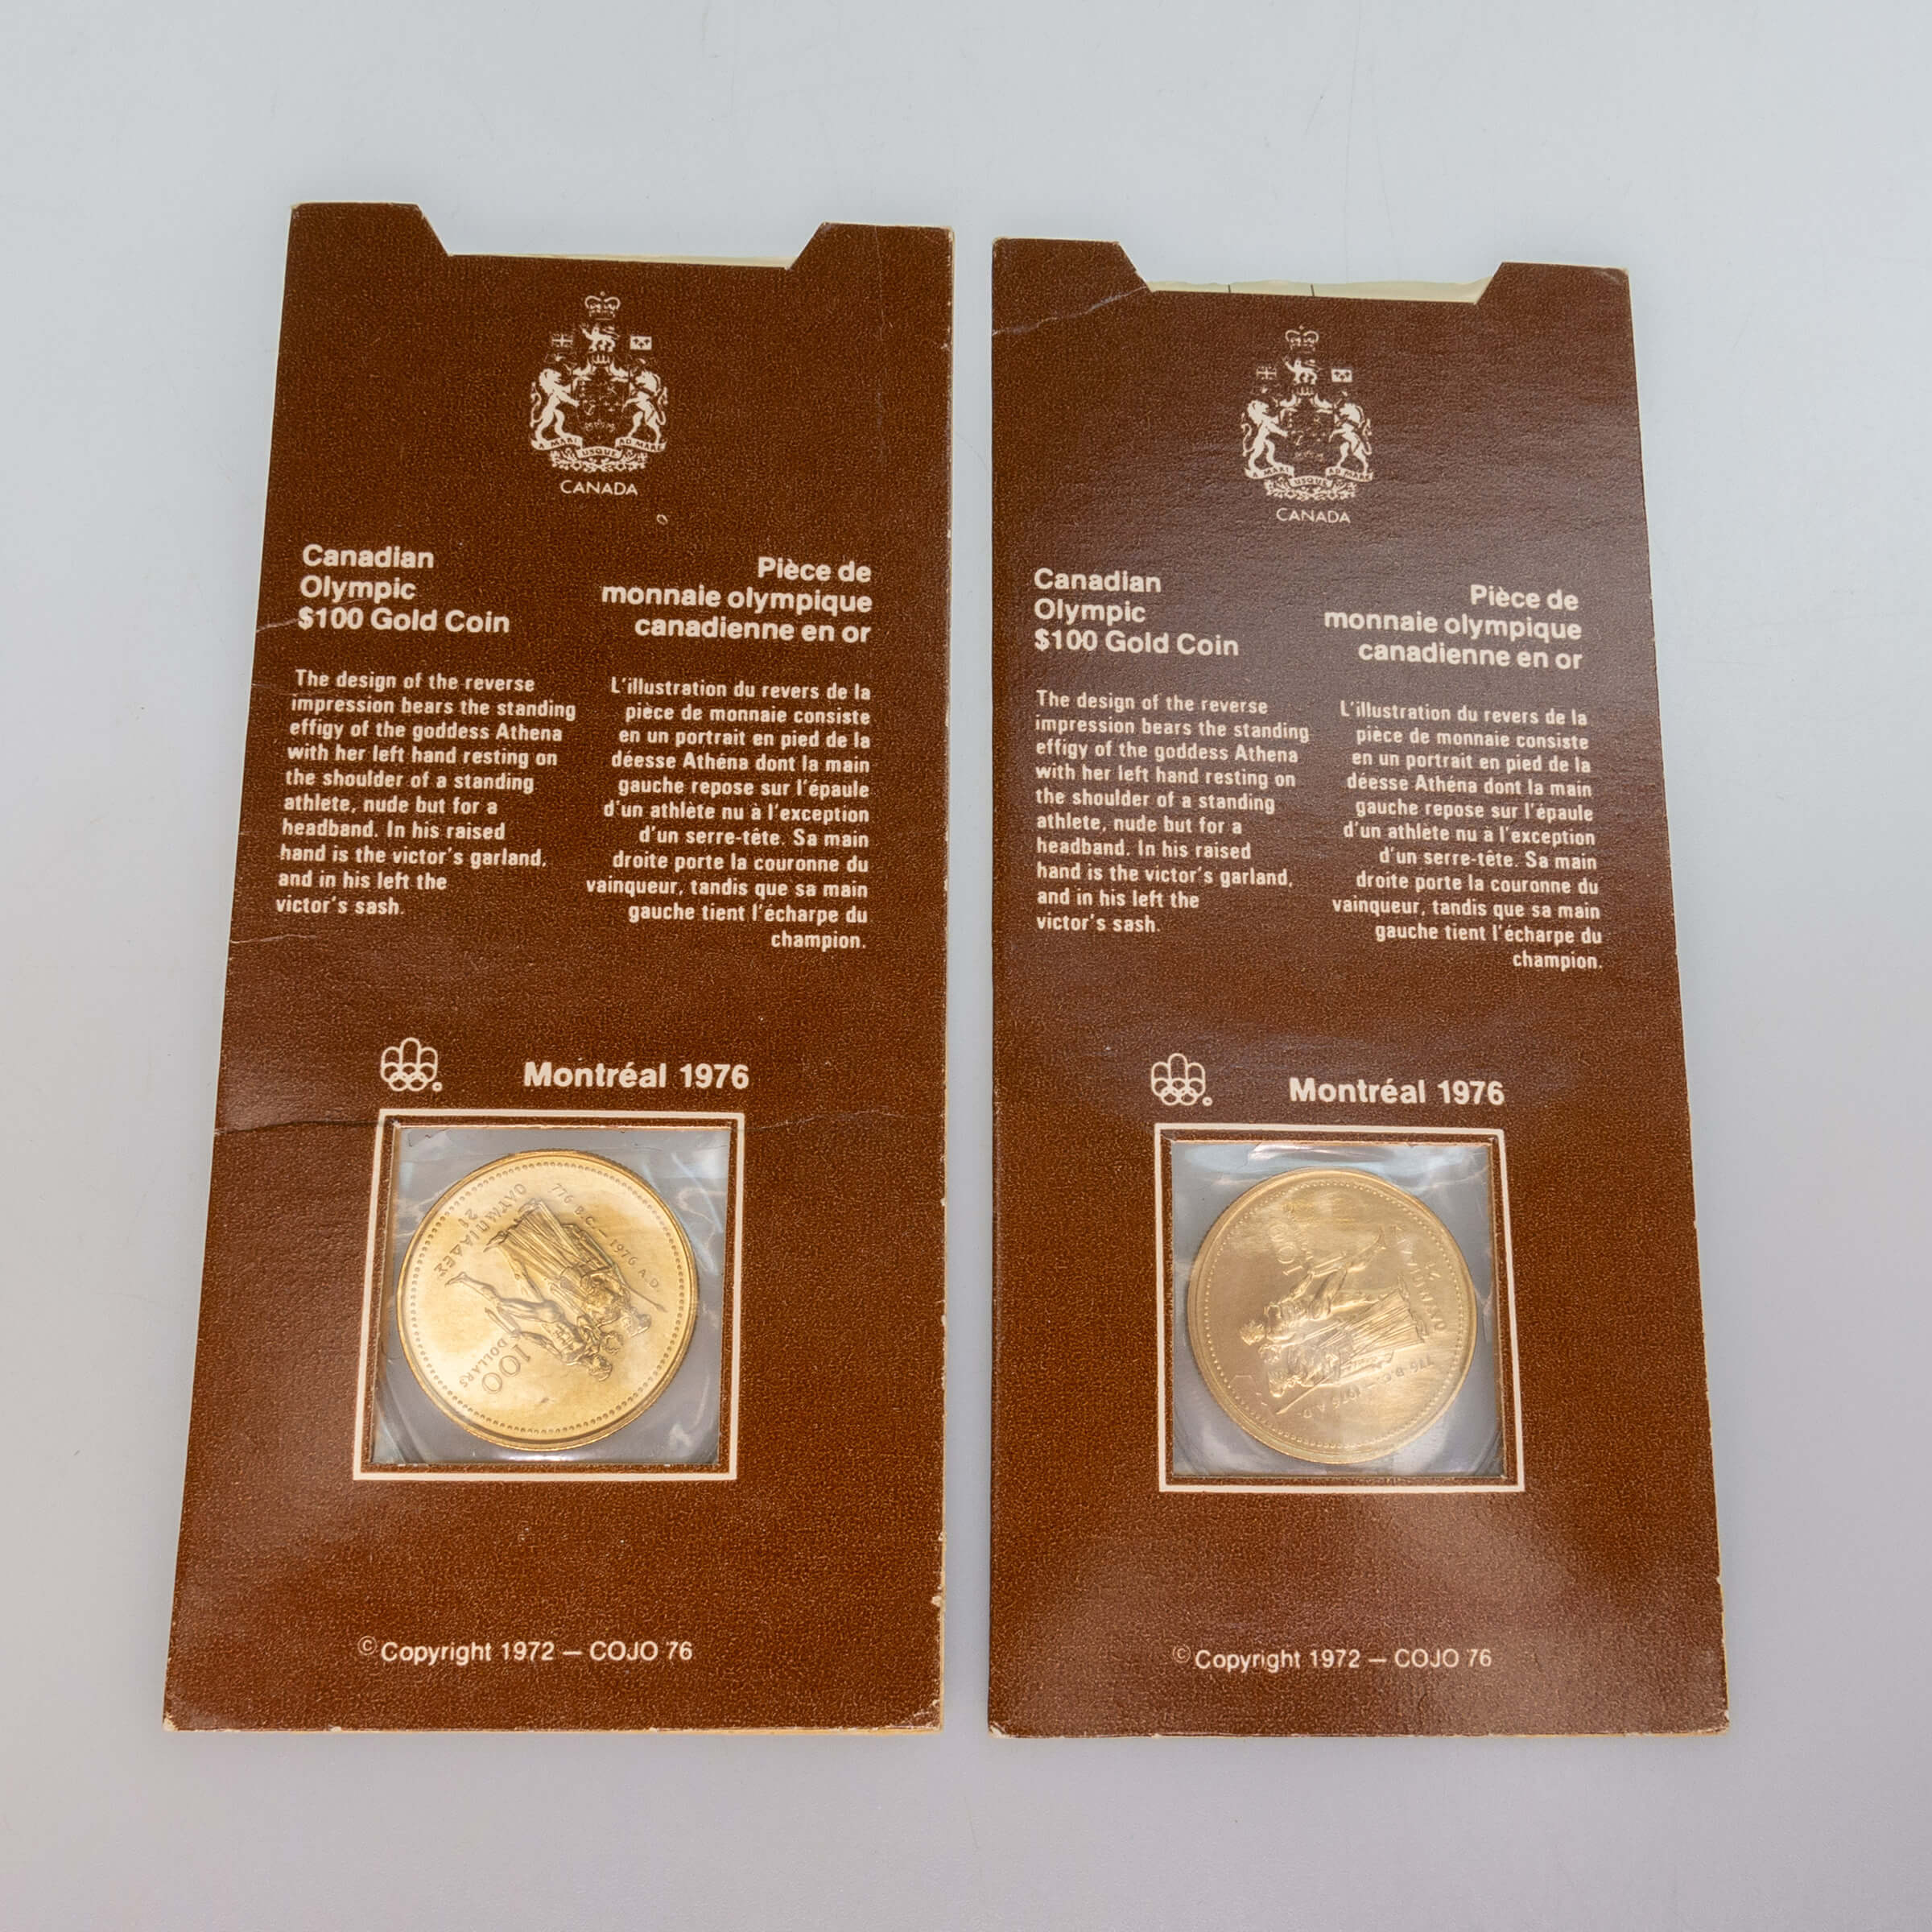 Two Canadian 1976 $100 Gold Coins